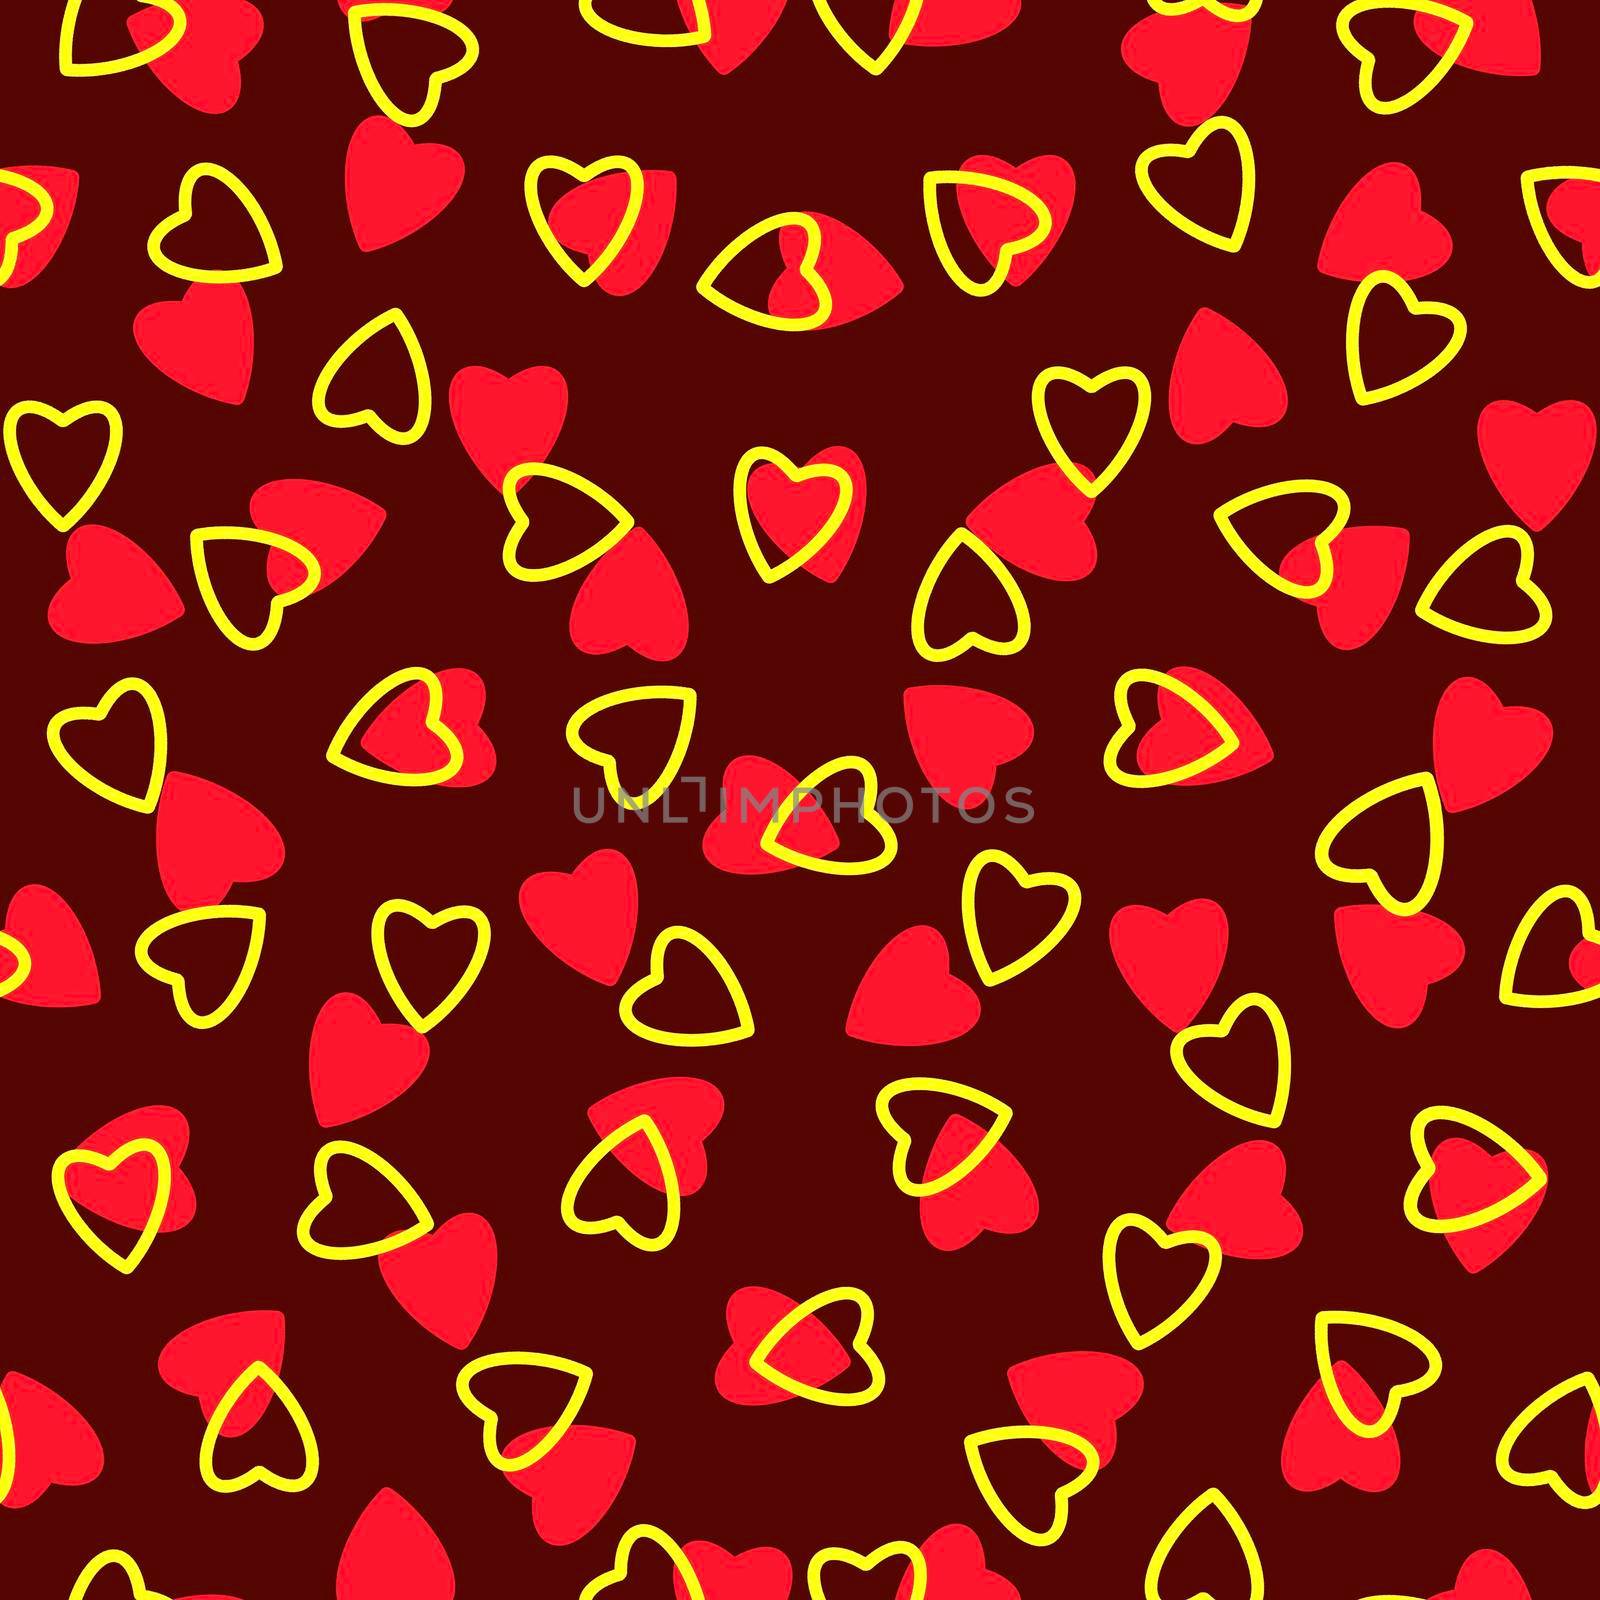 Simple hearts seamless pattern,endless chaotic texture made tiny heart silhouettes.Valentines,mothers day background.Red,yellow,burgundy.Great for Easter,wedding,scrapbook,gift wrapping paper,textiles